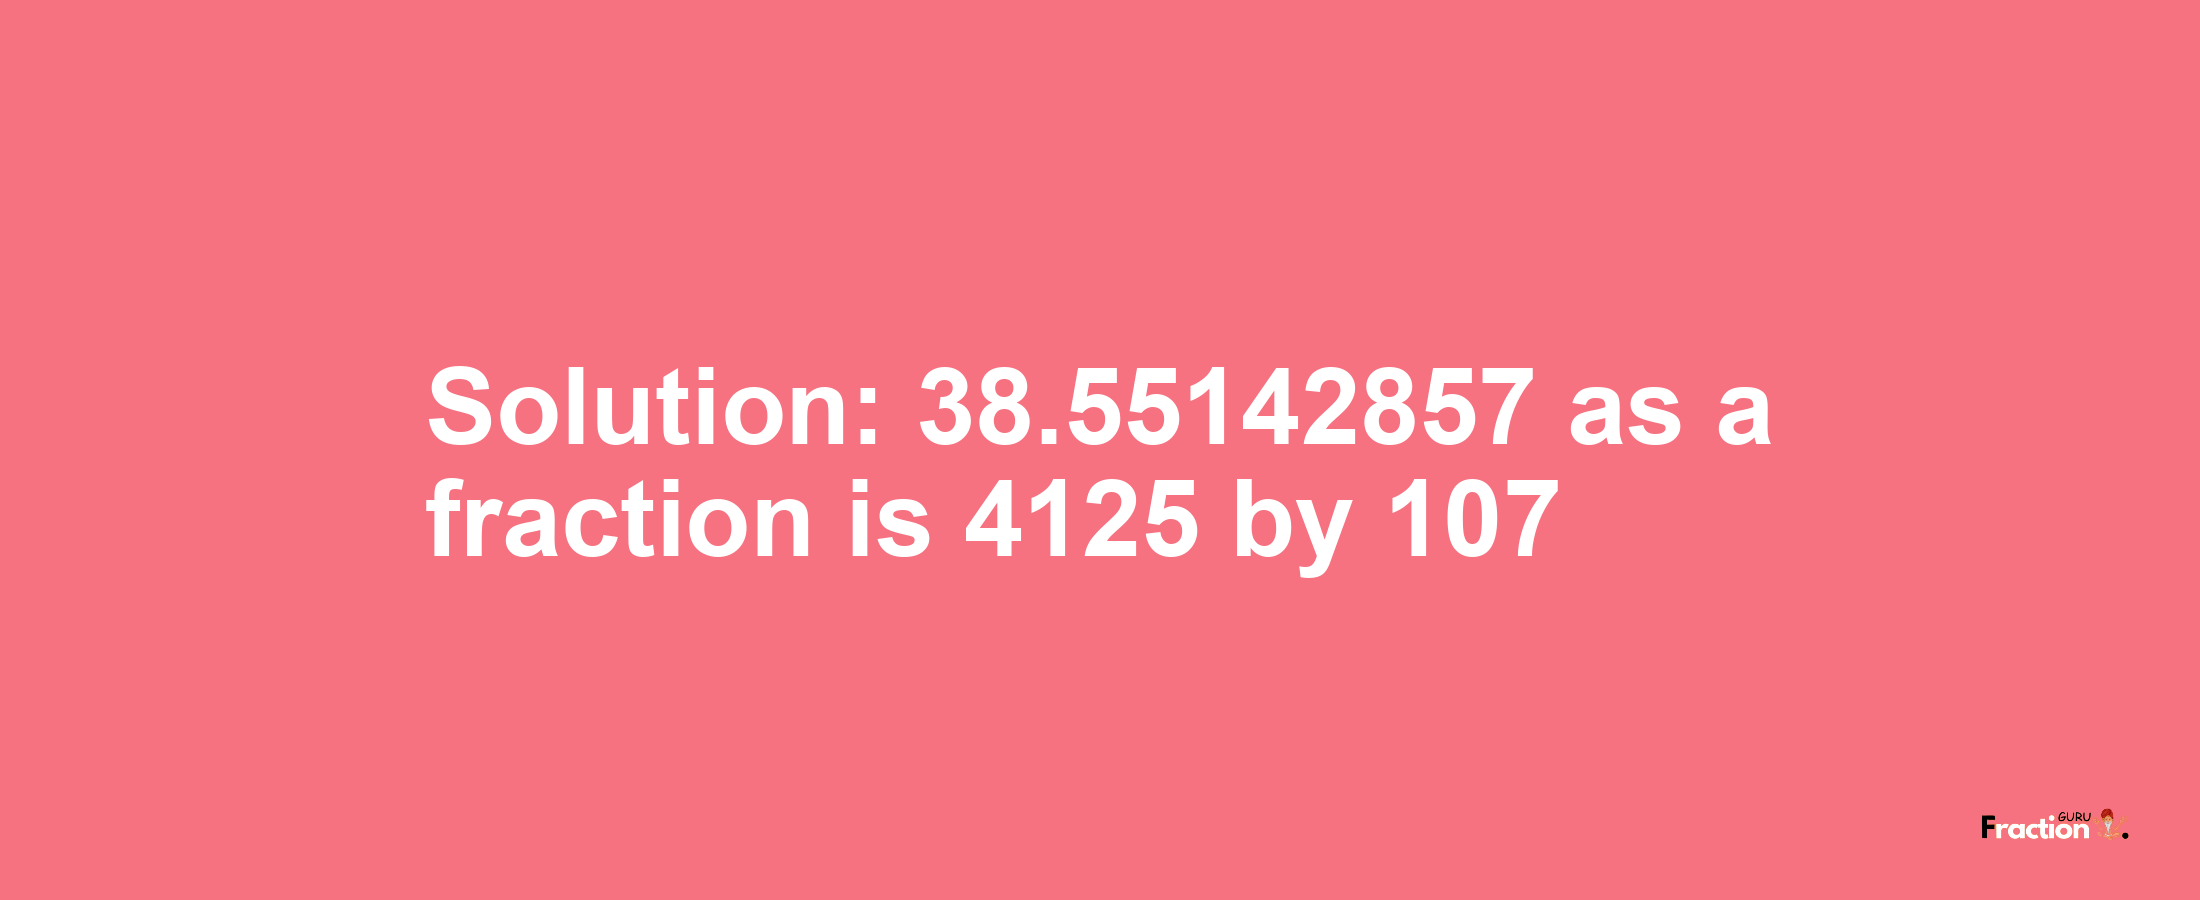 Solution:38.55142857 as a fraction is 4125/107